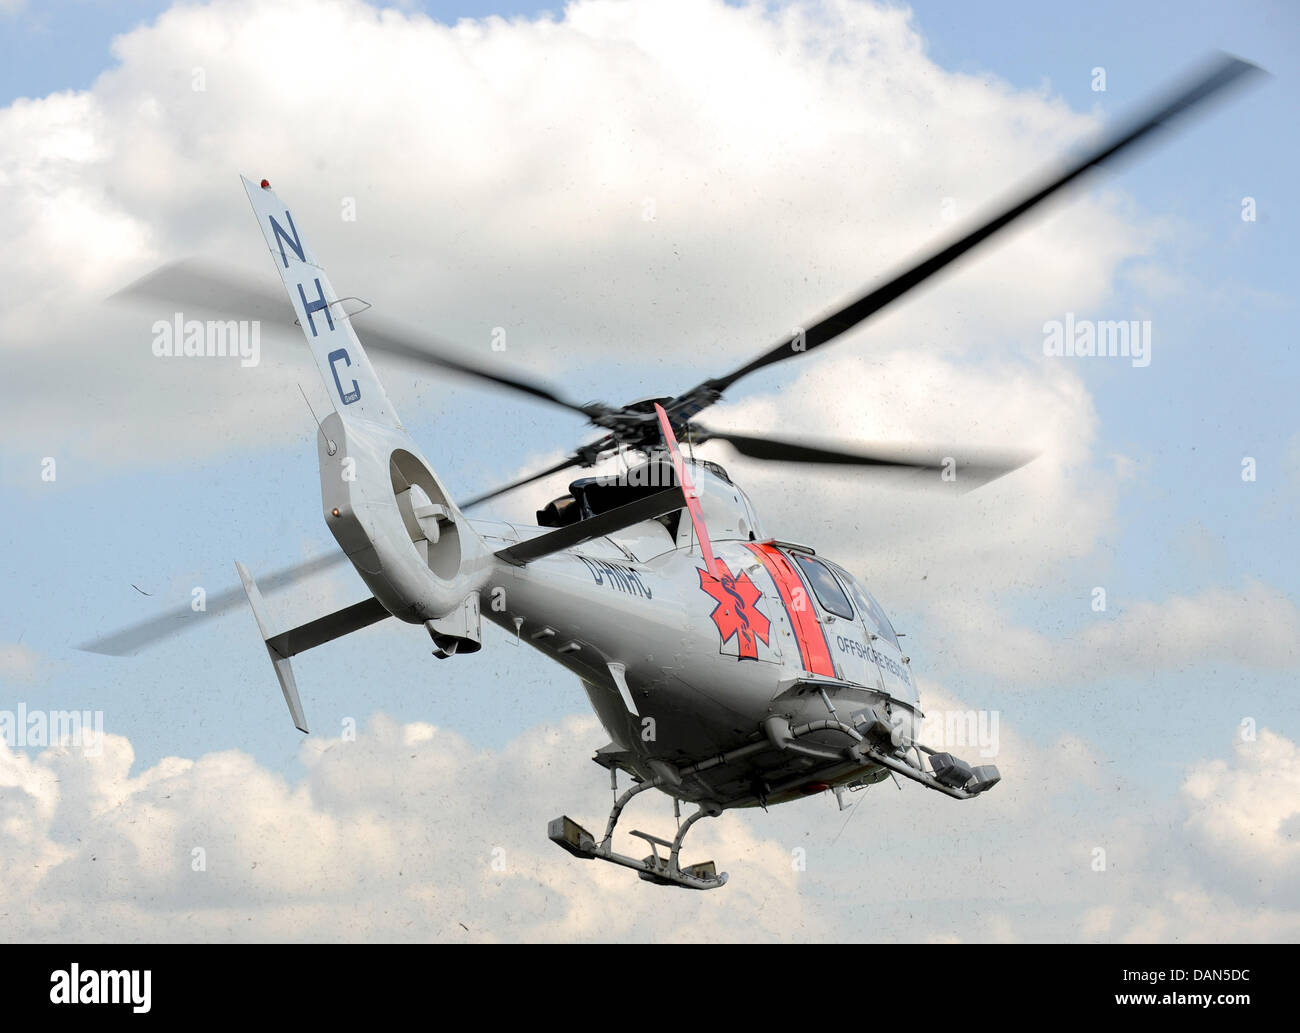 A helicopter of the model Eurocopter SA 365, that is specially equipped for offshore rescue missions, takes off for a demonstration flight in Emden, Germany, 08 July 2011. The helicopter is the core element of offshore rescue planning, which is conceptualised by wind turbine manufacturer BARD in collaboration with the German Red Cross and the company Northern HeliCopter. Photo: Ing Stock Photo